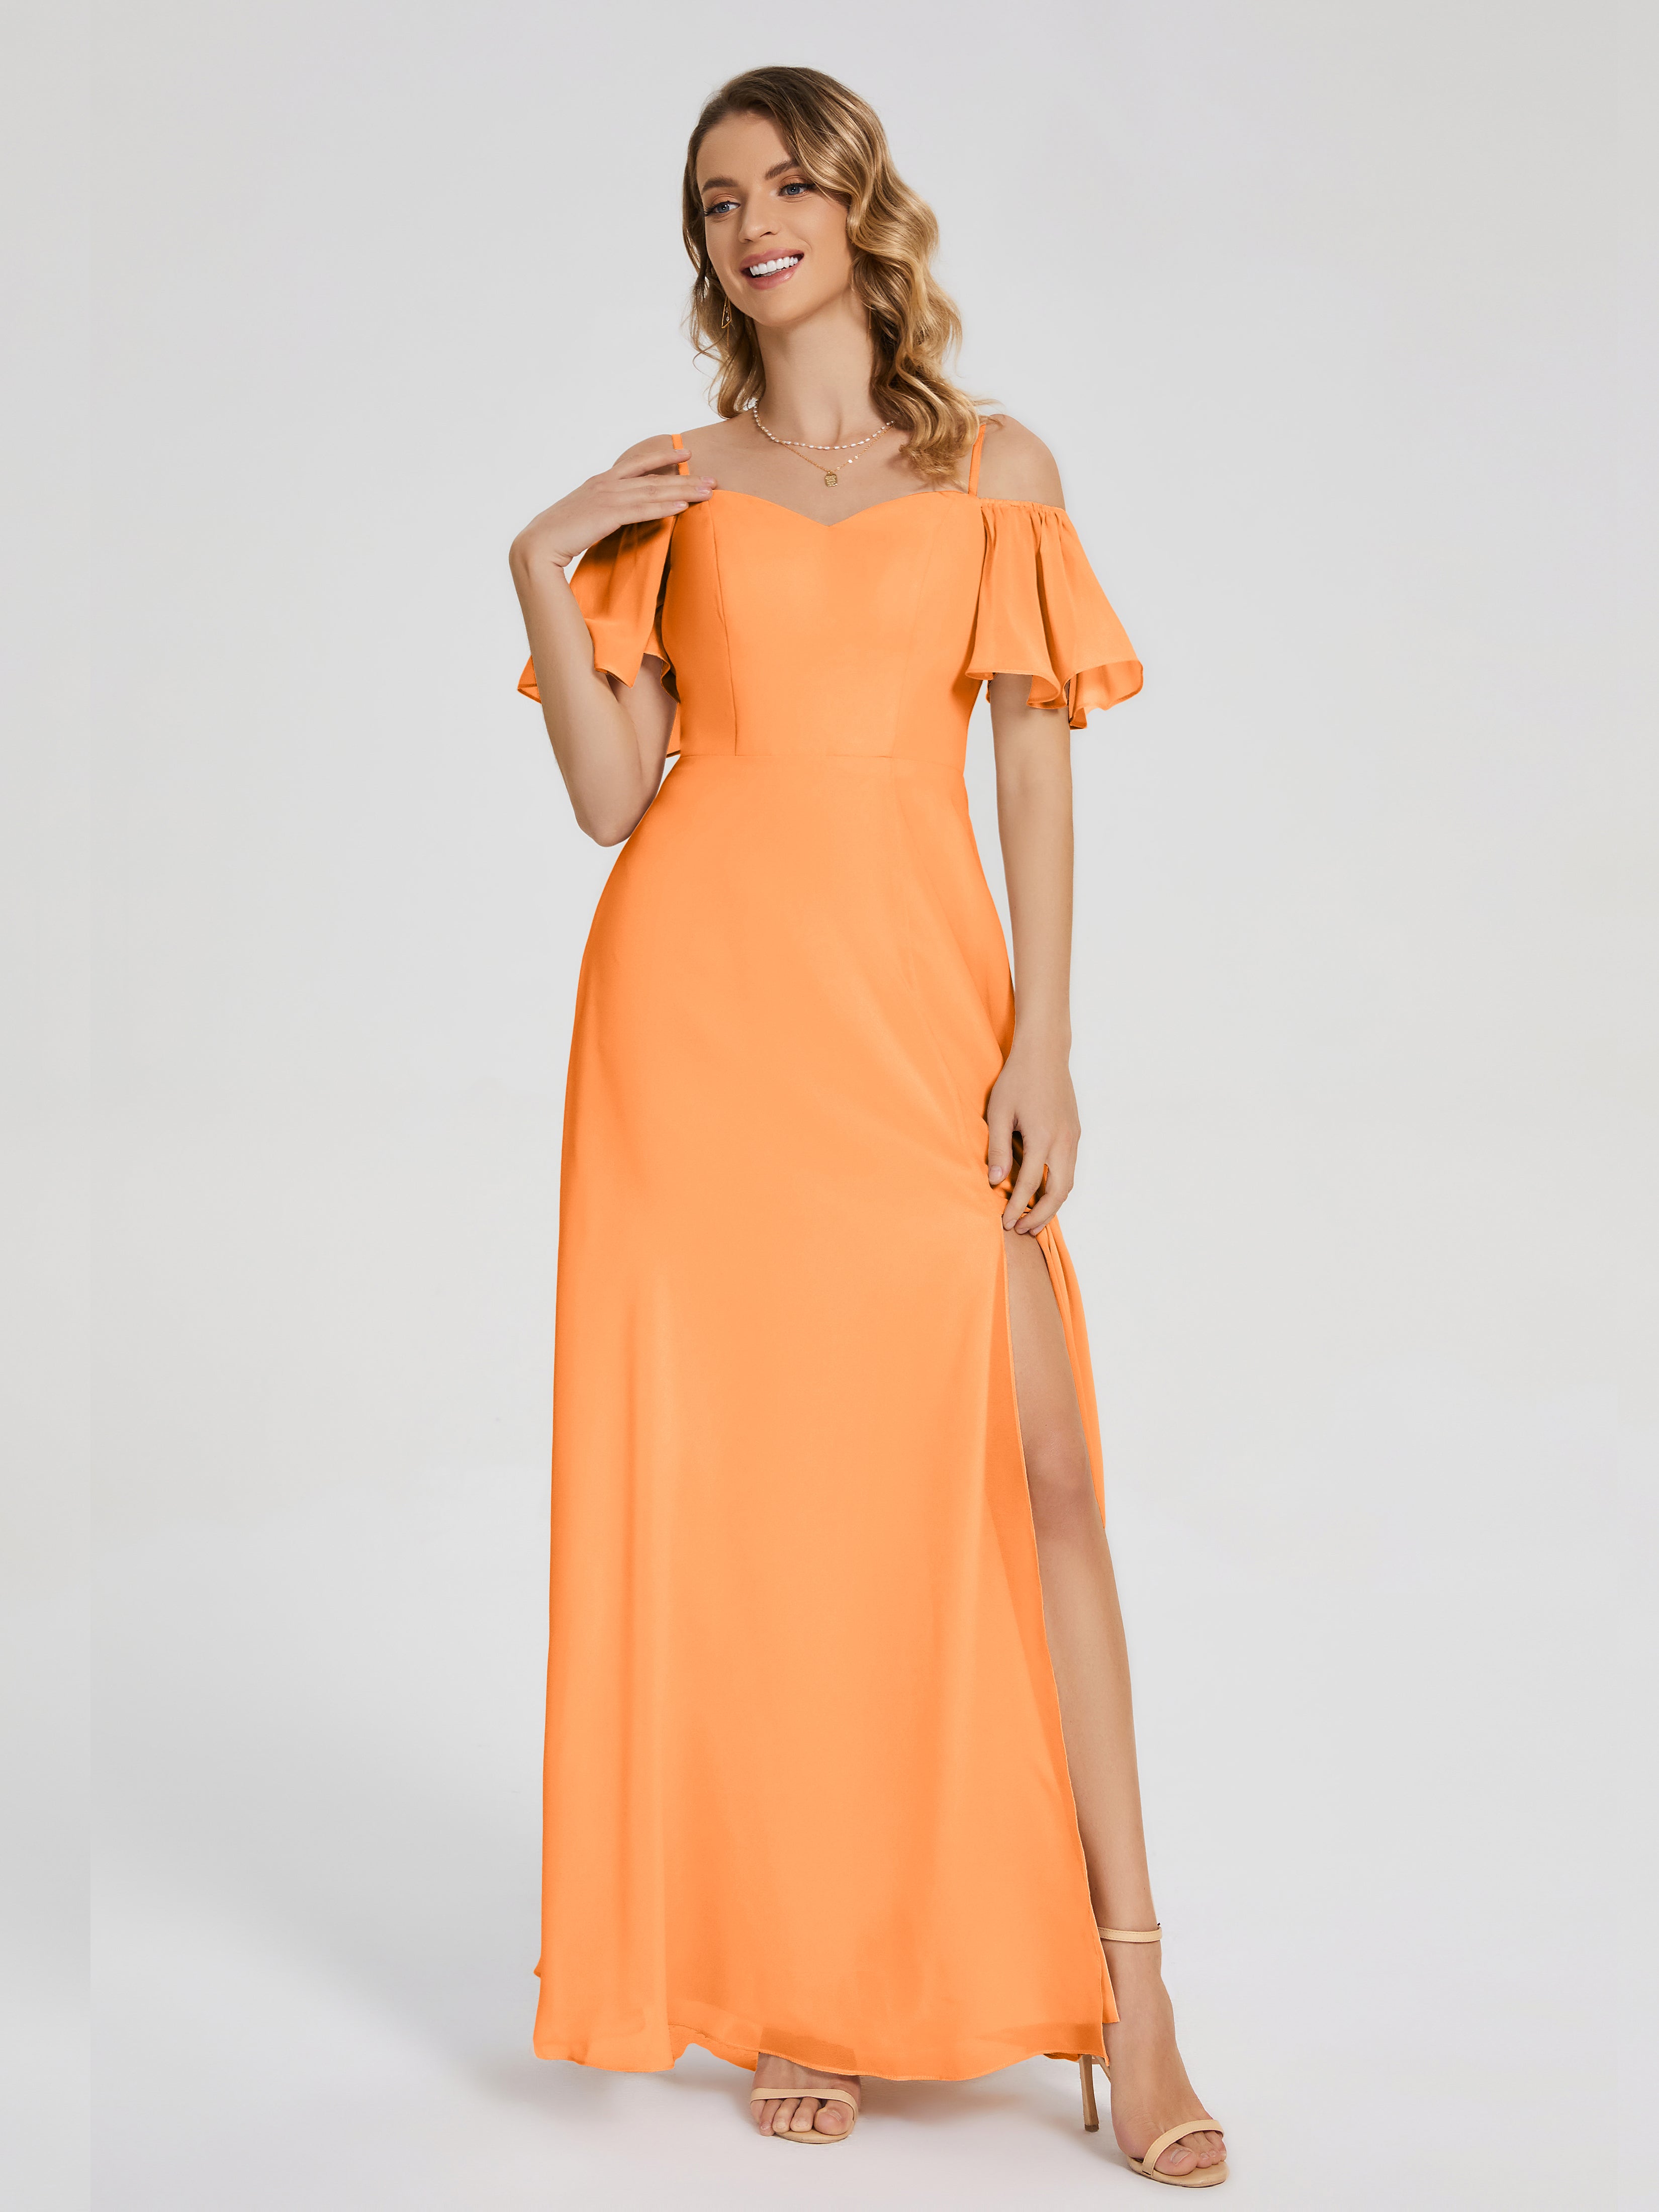 Adelaide A-line Off the Shoulder Chiffon Bridesmaid Dress with Silt